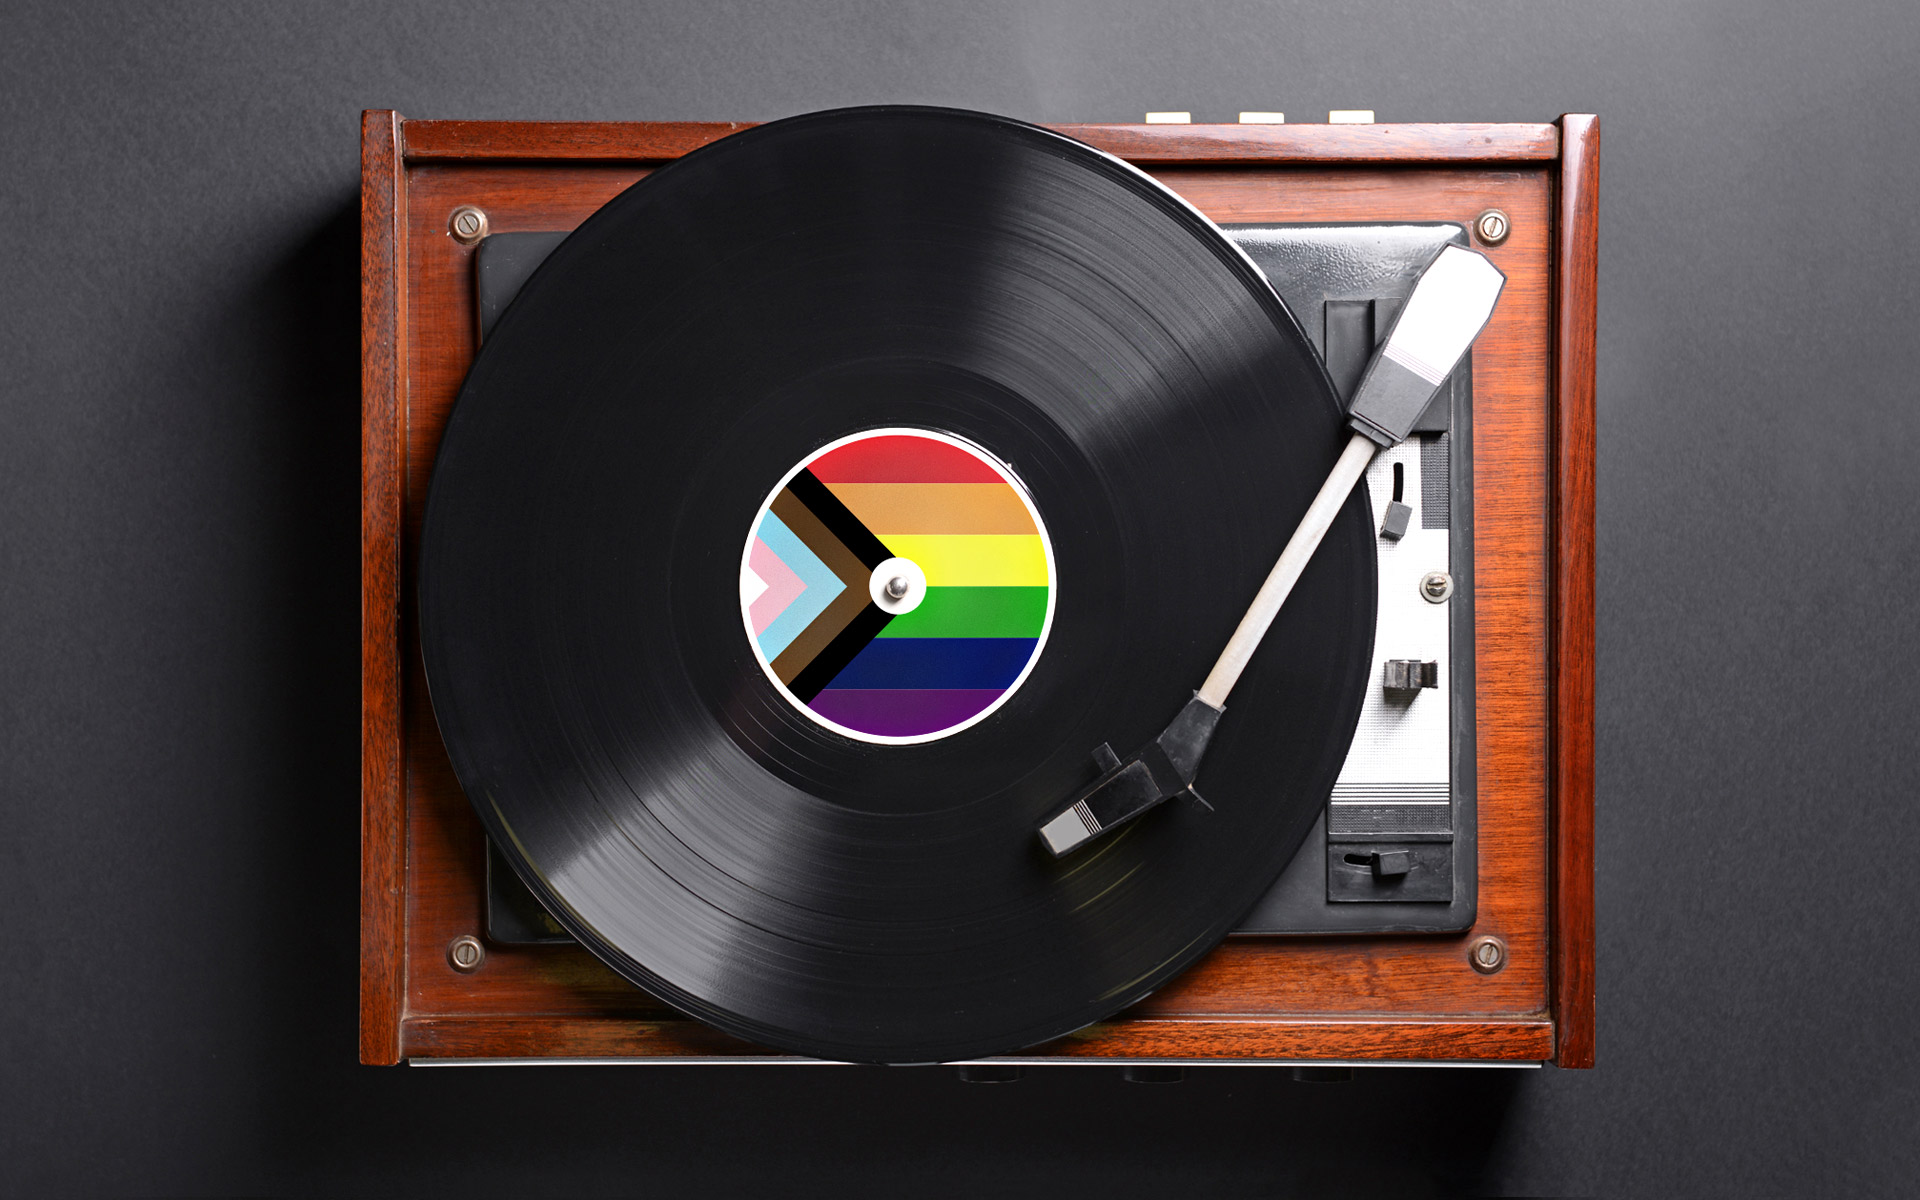 Vinyl record featuring the progress pride flag on a turn table.